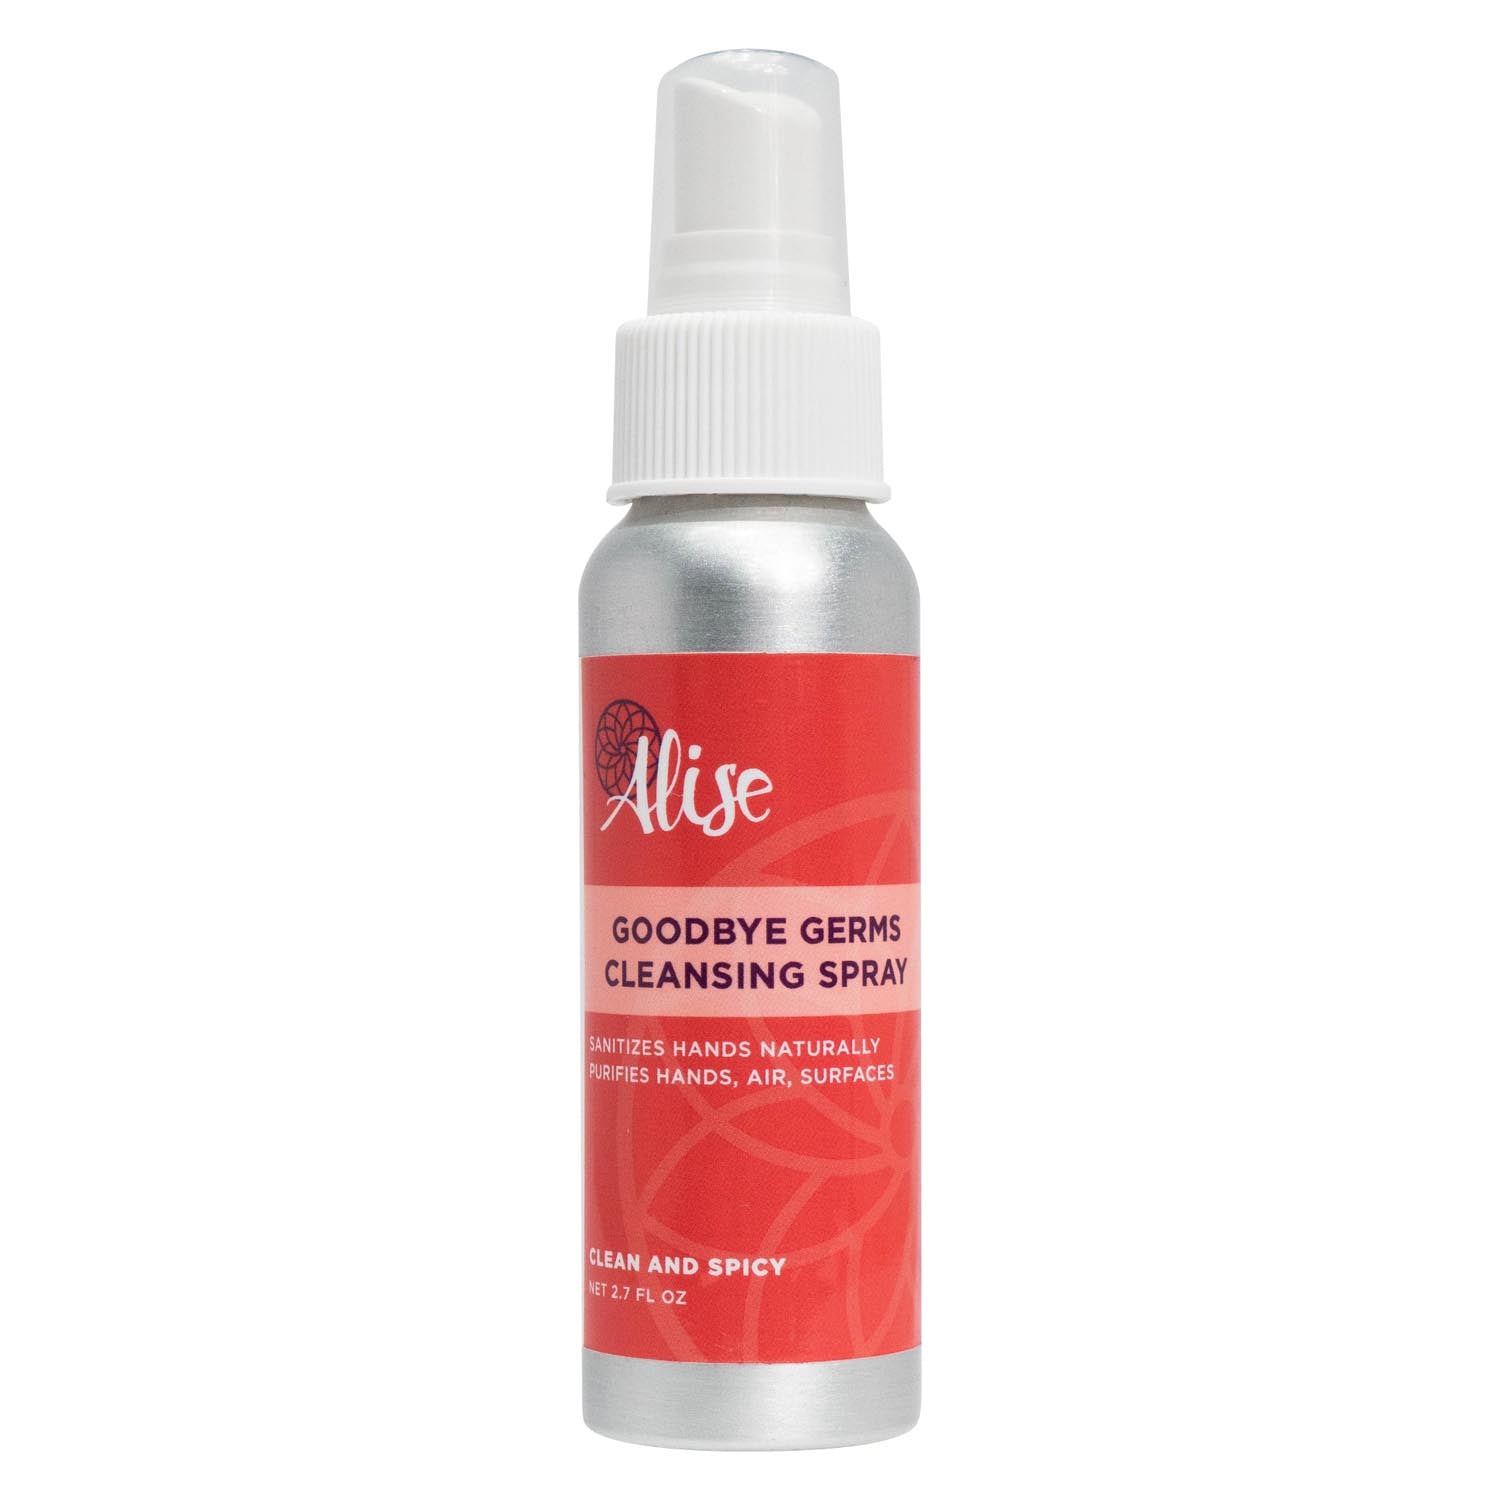 Goodbye Germs Cleansing Spray 2.7oz handcrafted by Alise Body Care